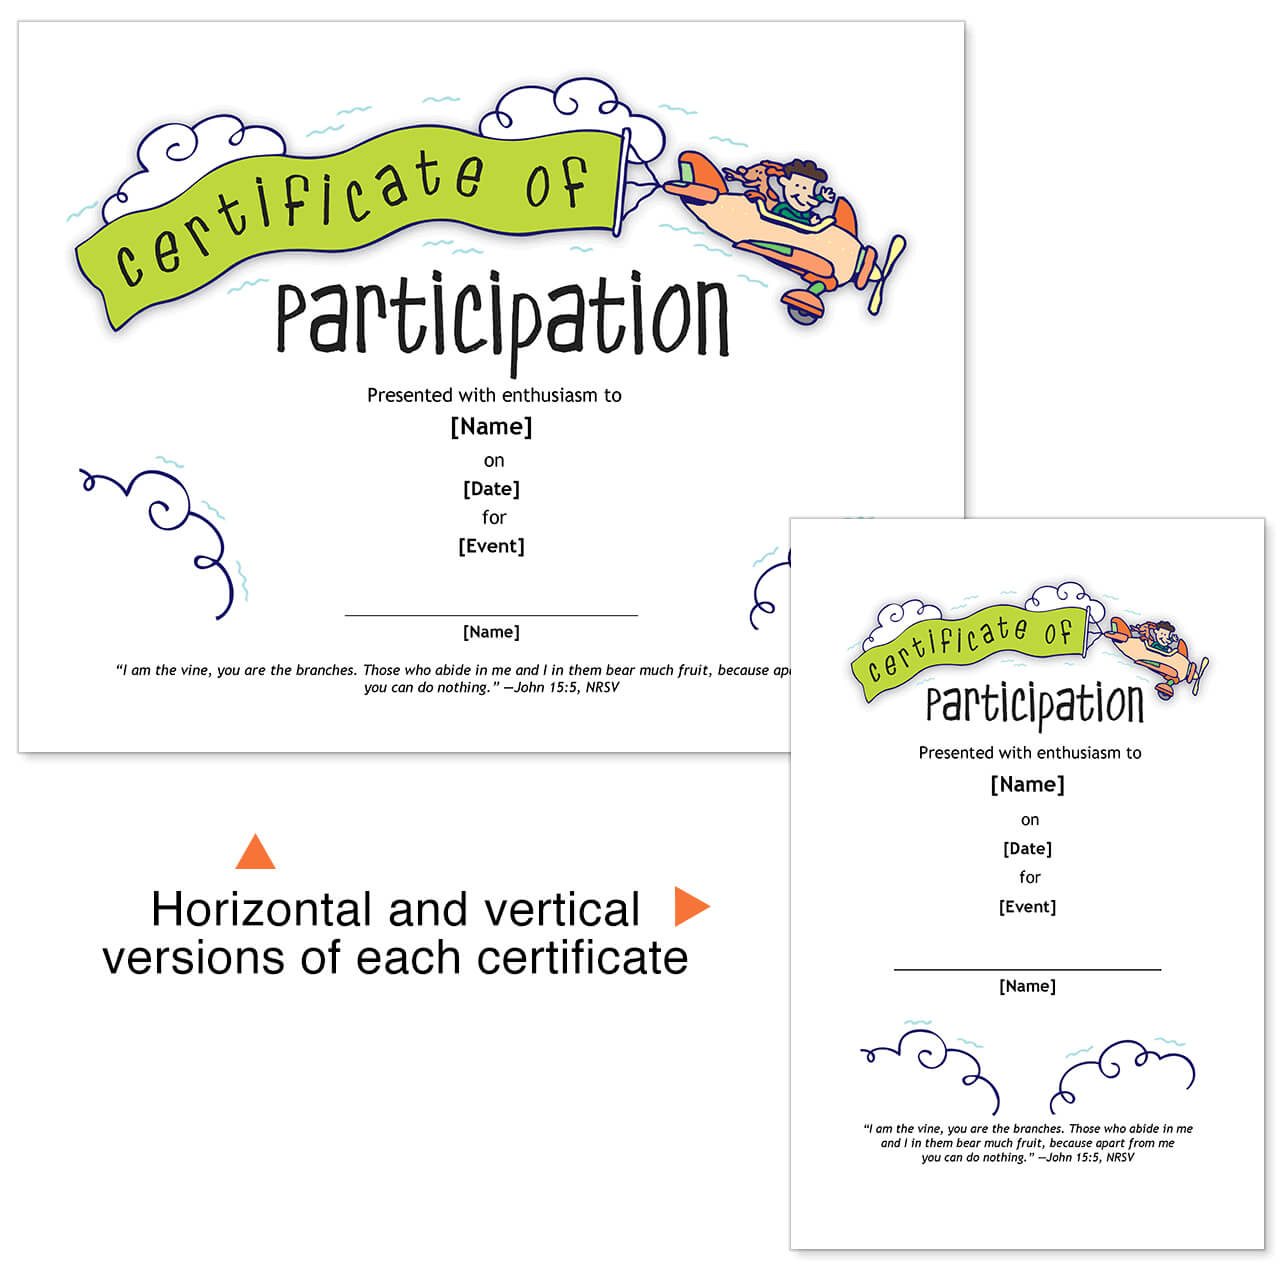 Church Certificate Template For Participation In Vbs, Sunday In Vbs Certificate Template